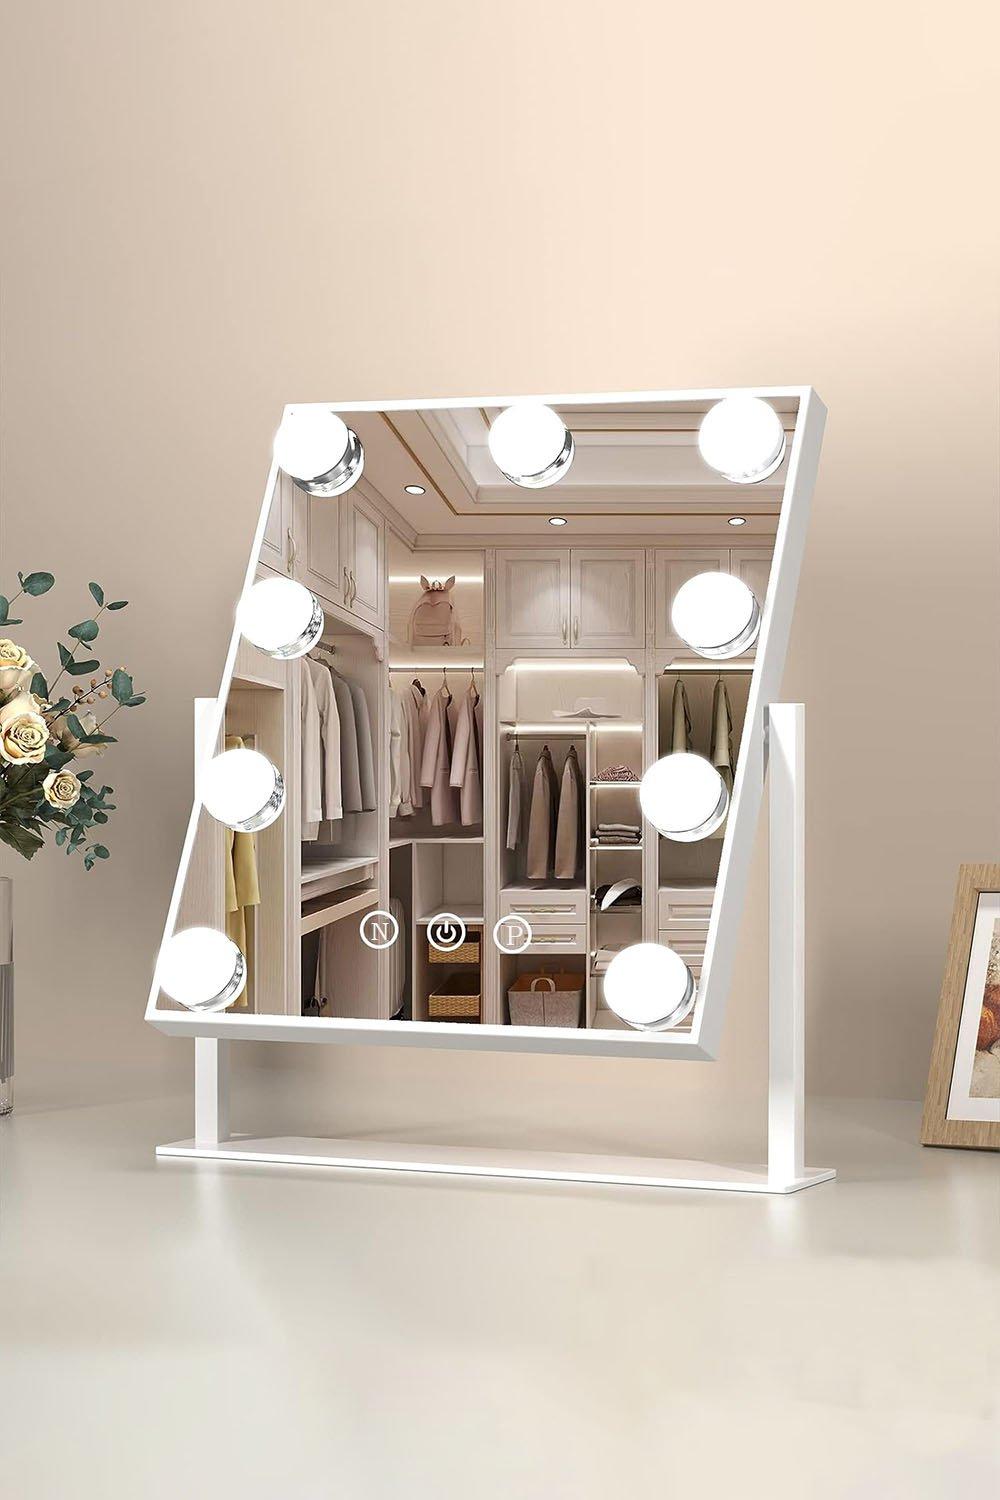 Touch Control Design Hollywood Vanity Mirror with 9 LED Bulbs,30.5*35.5cm